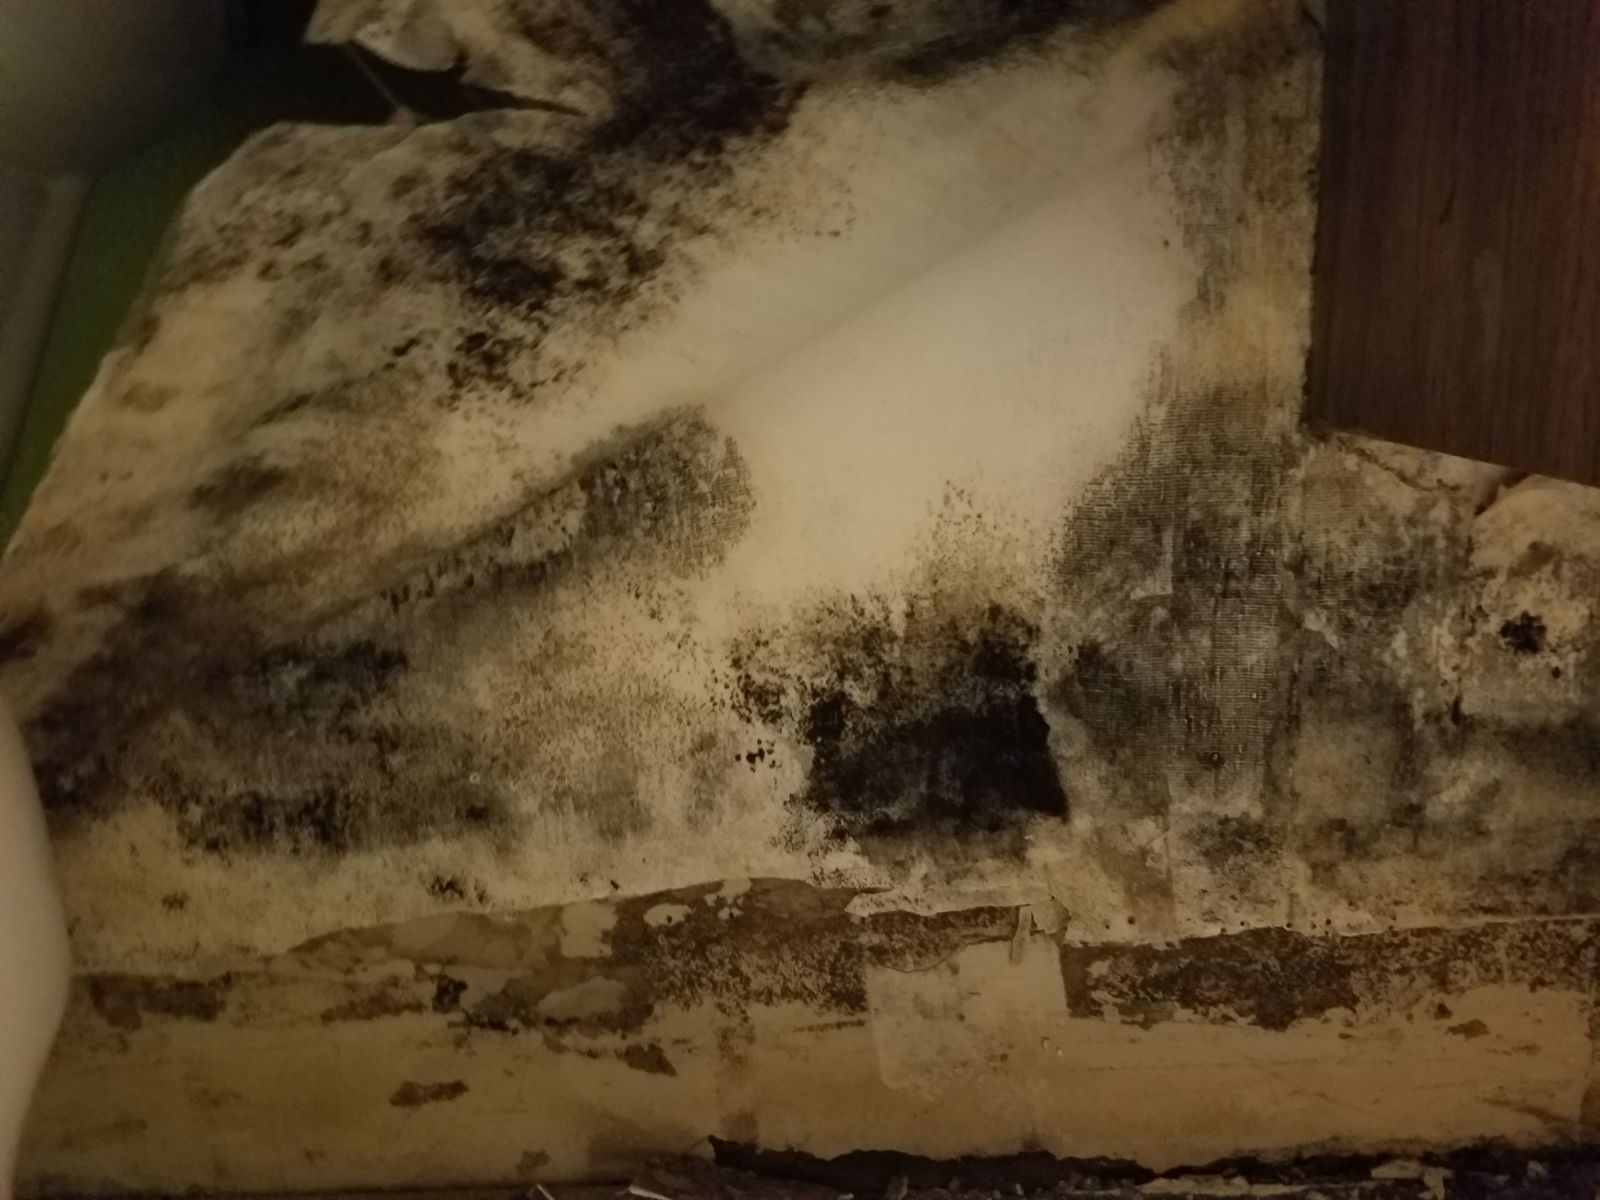 Bathroom Mold Steve neglected to find